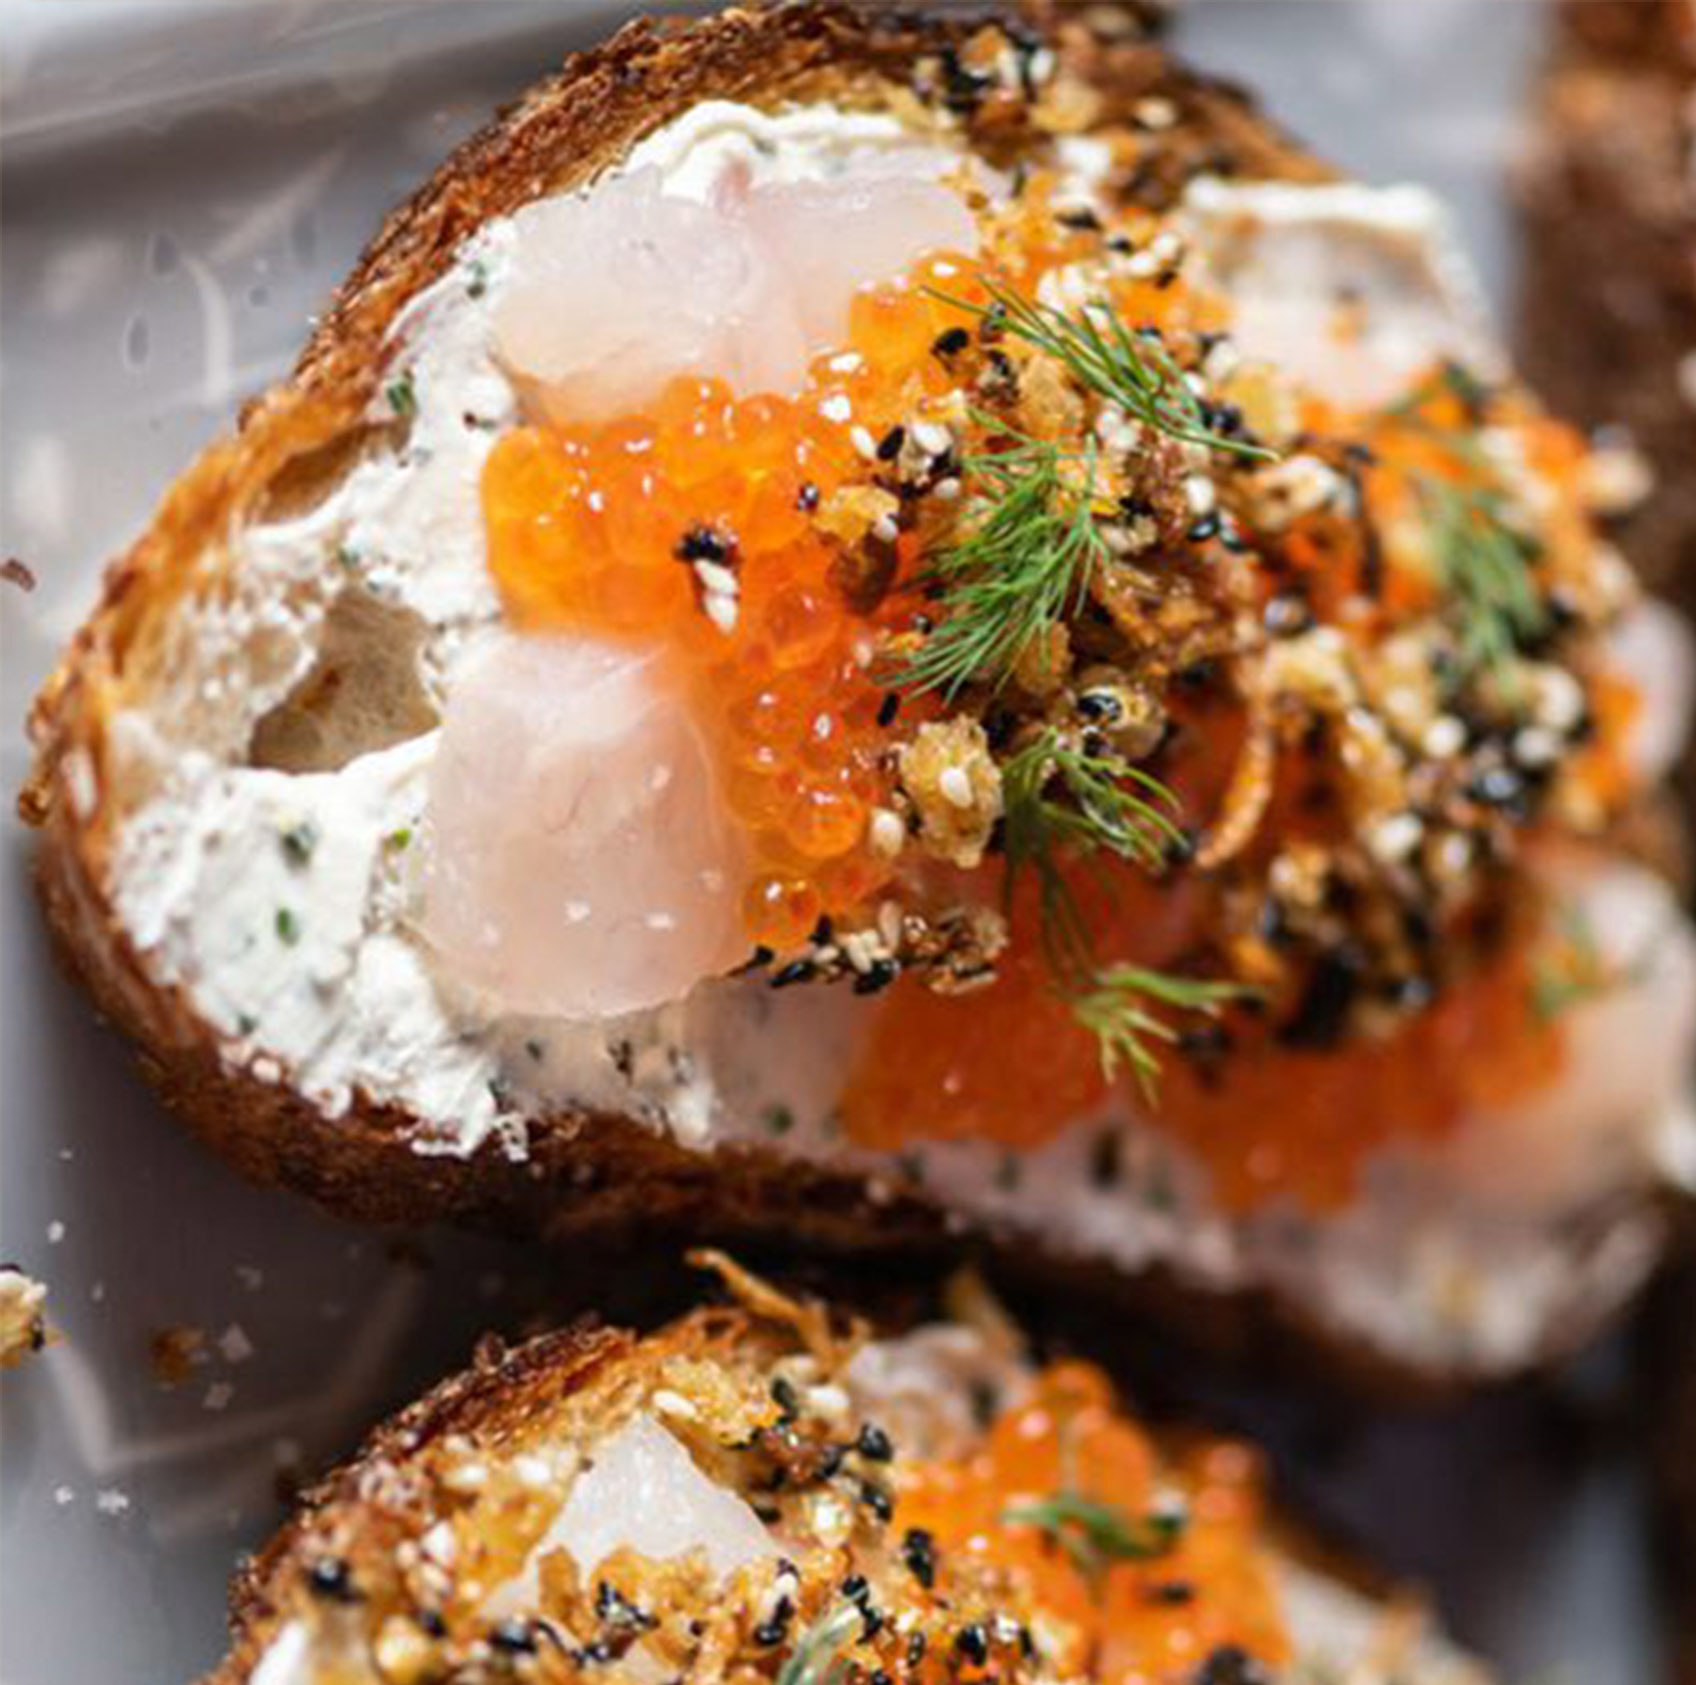 A piece of toast with cream cheese, fish, roe, herbs, and seasonings.